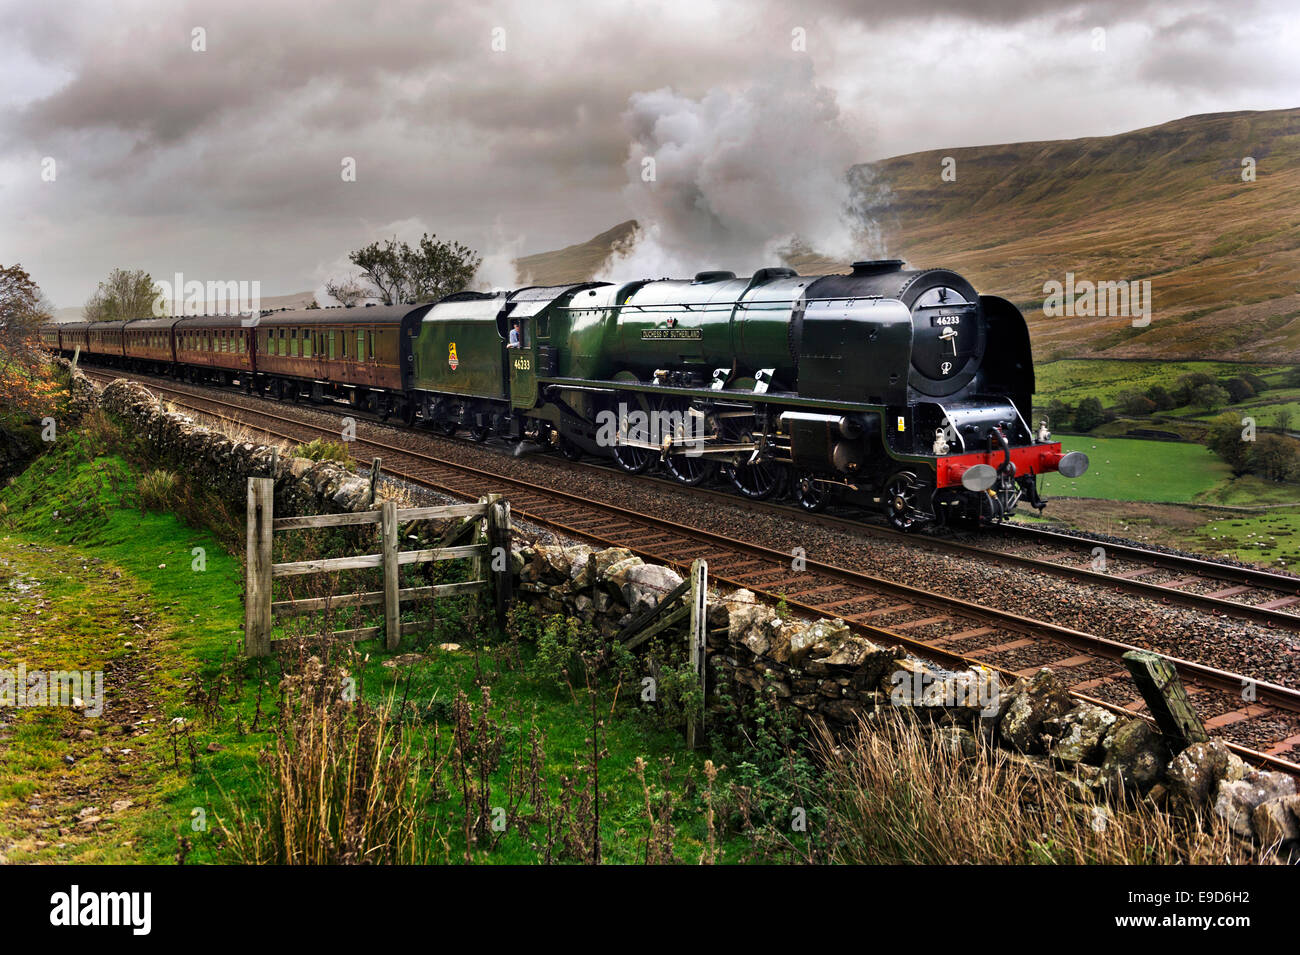 Kirkby Stephen, Cumbria, UK. 25th Oct, 2014.  The Duchess of Sutherland steam locomotive hauling the Appleby Explorer excursion on the Settle-Carlisle railway line near Kirkby Stephen, Cumbria, UK. Stock Photo